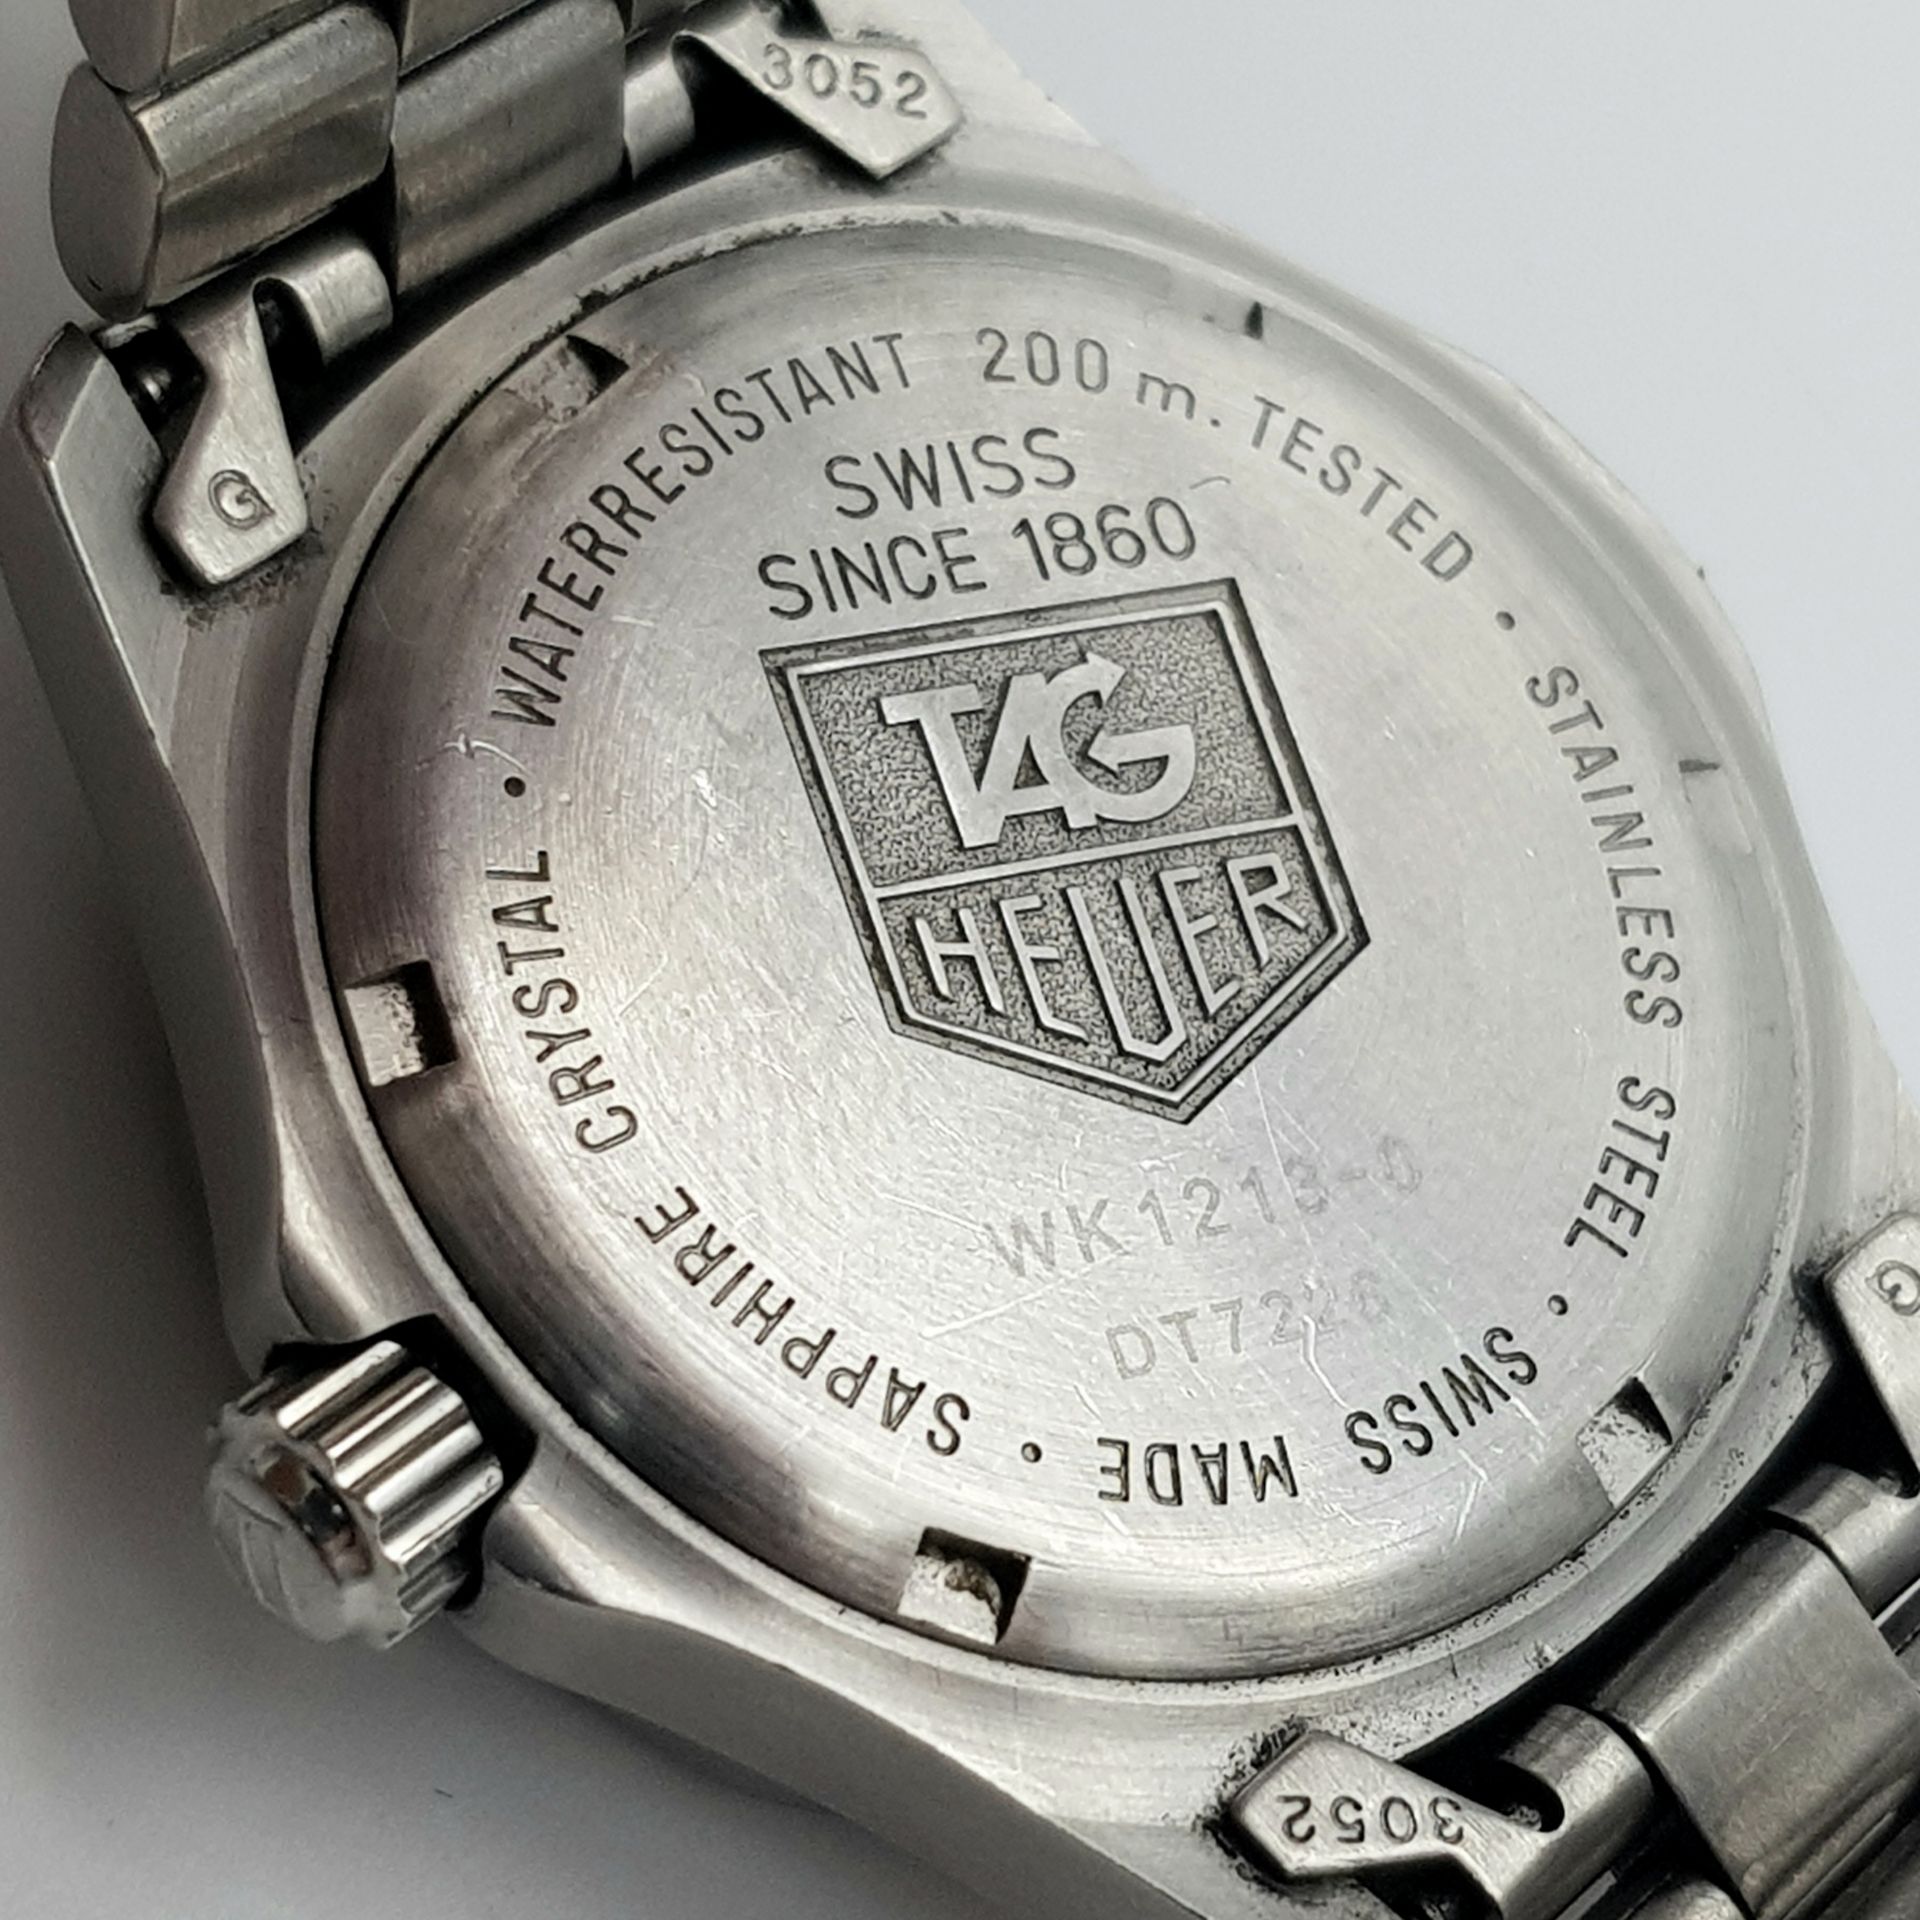 A TAG-HEUER LADIES PROFESSIONAL STAINLESS STEEL WATCH WITH AMAZING NAVY BLUE DIAL . 32mm COMES IN - Image 4 of 7